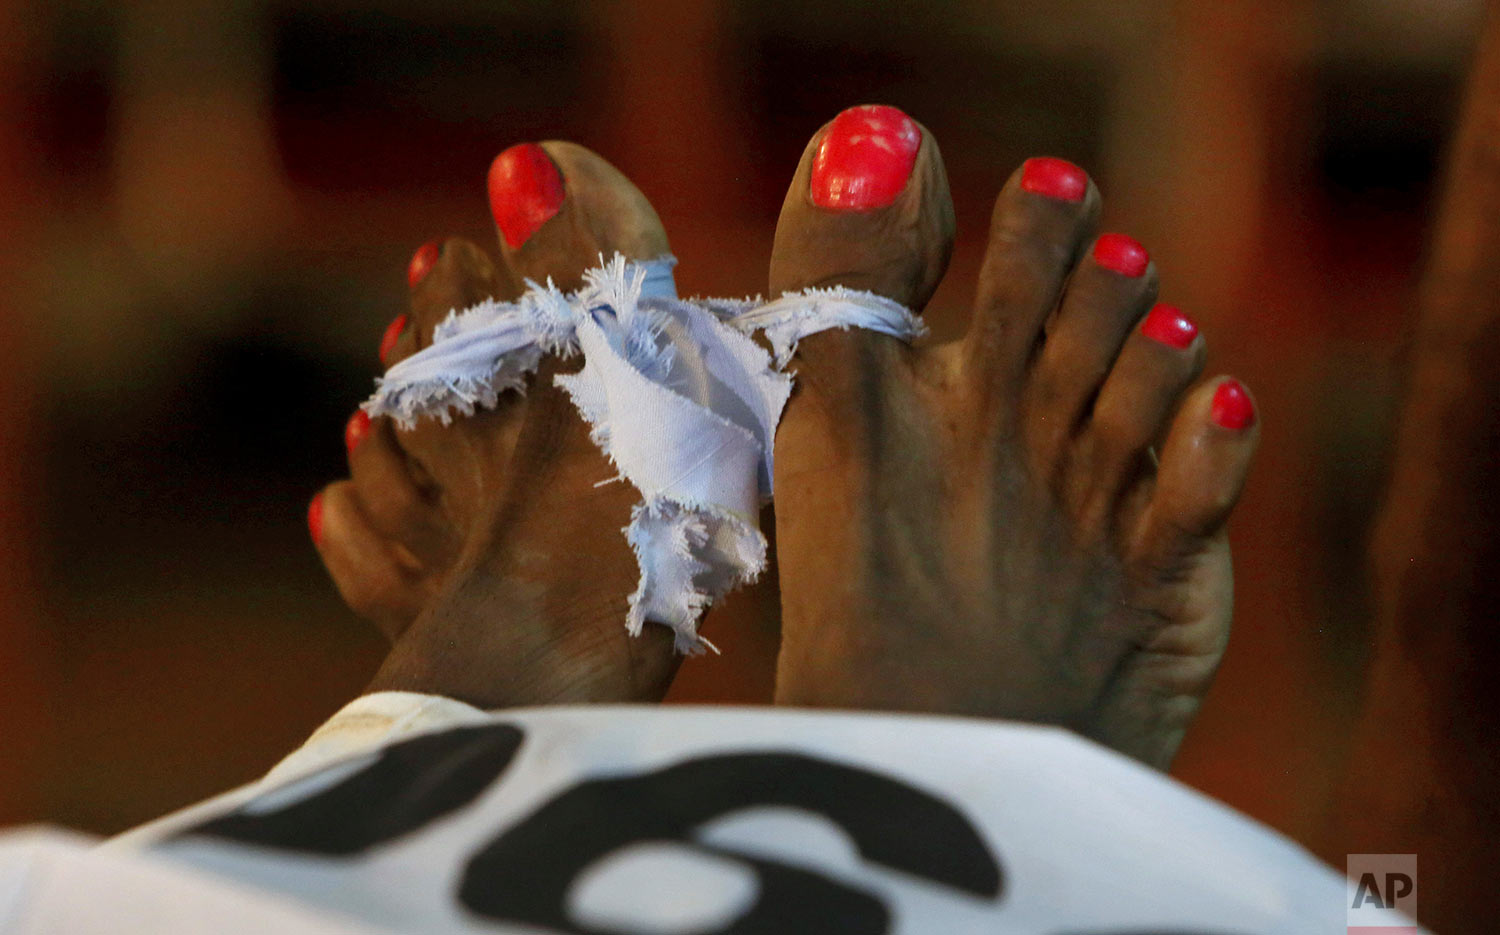  The feet of a transgender person, who was killed by unknown gunmen, are knotted together at a morgue in Karachi, Pakistan, Wednesday, Aug. 30, 2017. Pakistani police say gunmen opened fire on a group of transgender people, killing one of them, in an